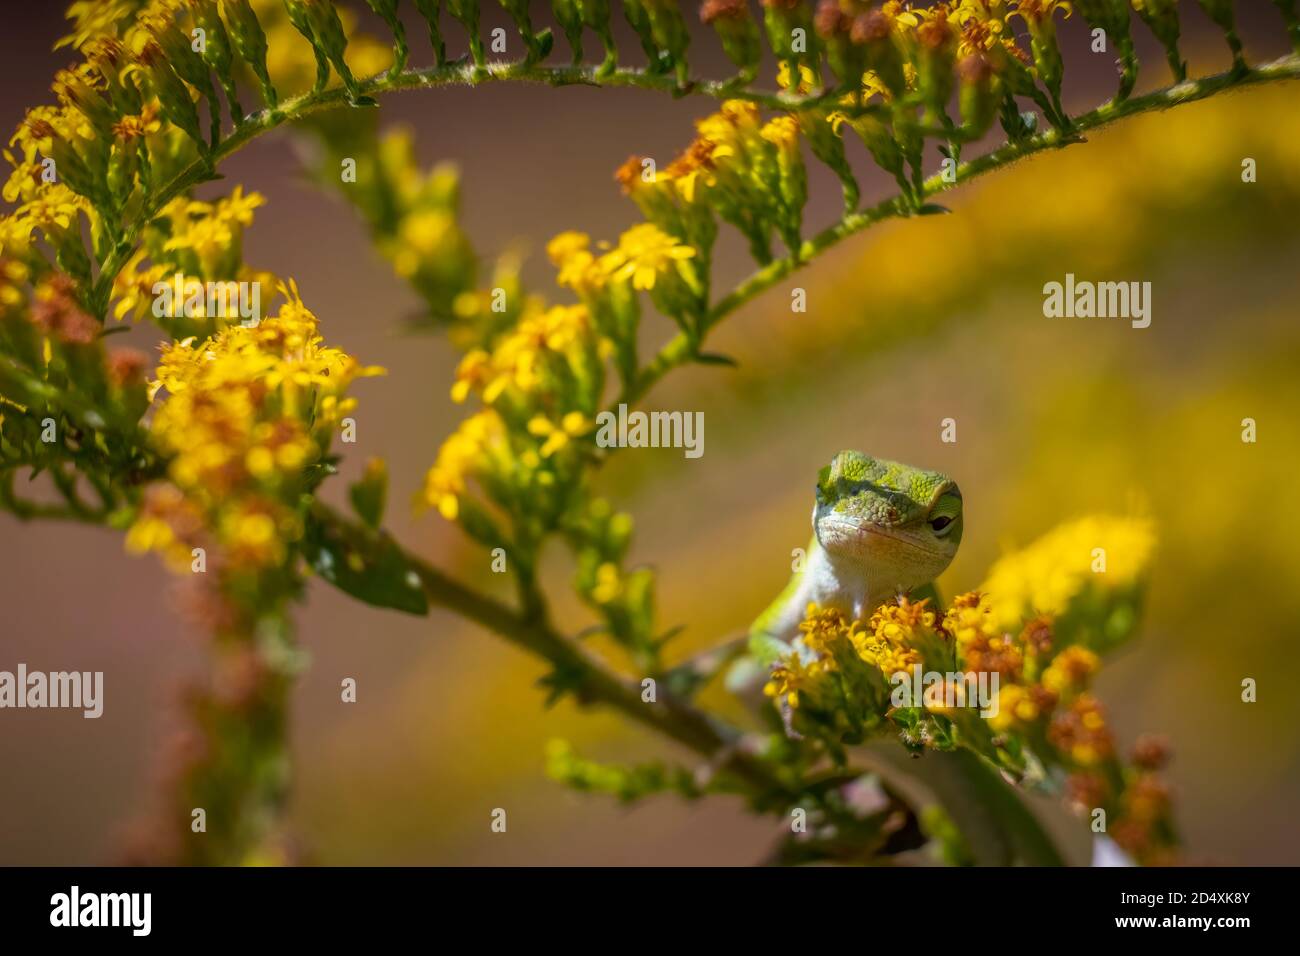 Green Anole (Anolis carolinensis) Relaxing in blooms of fall colors. Raleigh, North Carolina. Stock Photo